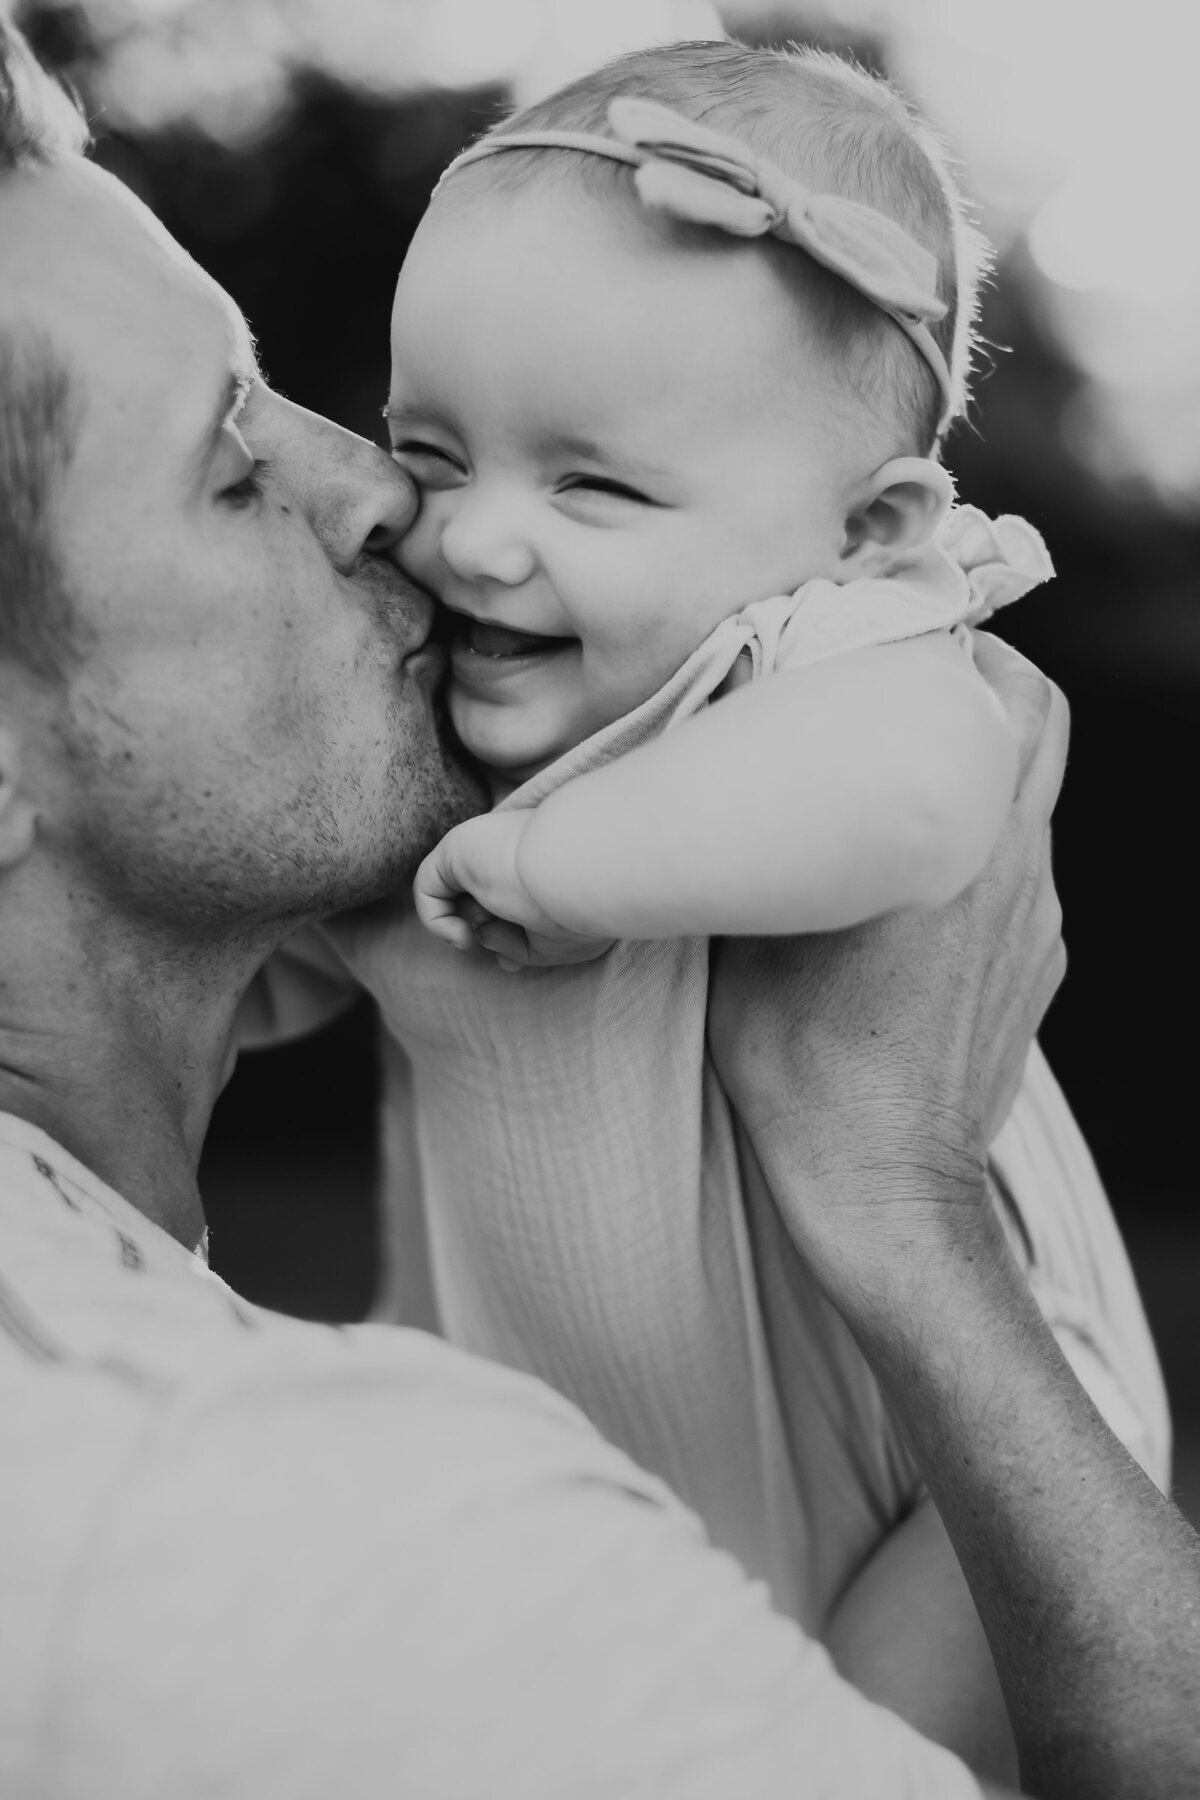 dad kissing laughing baby girl on the cheek